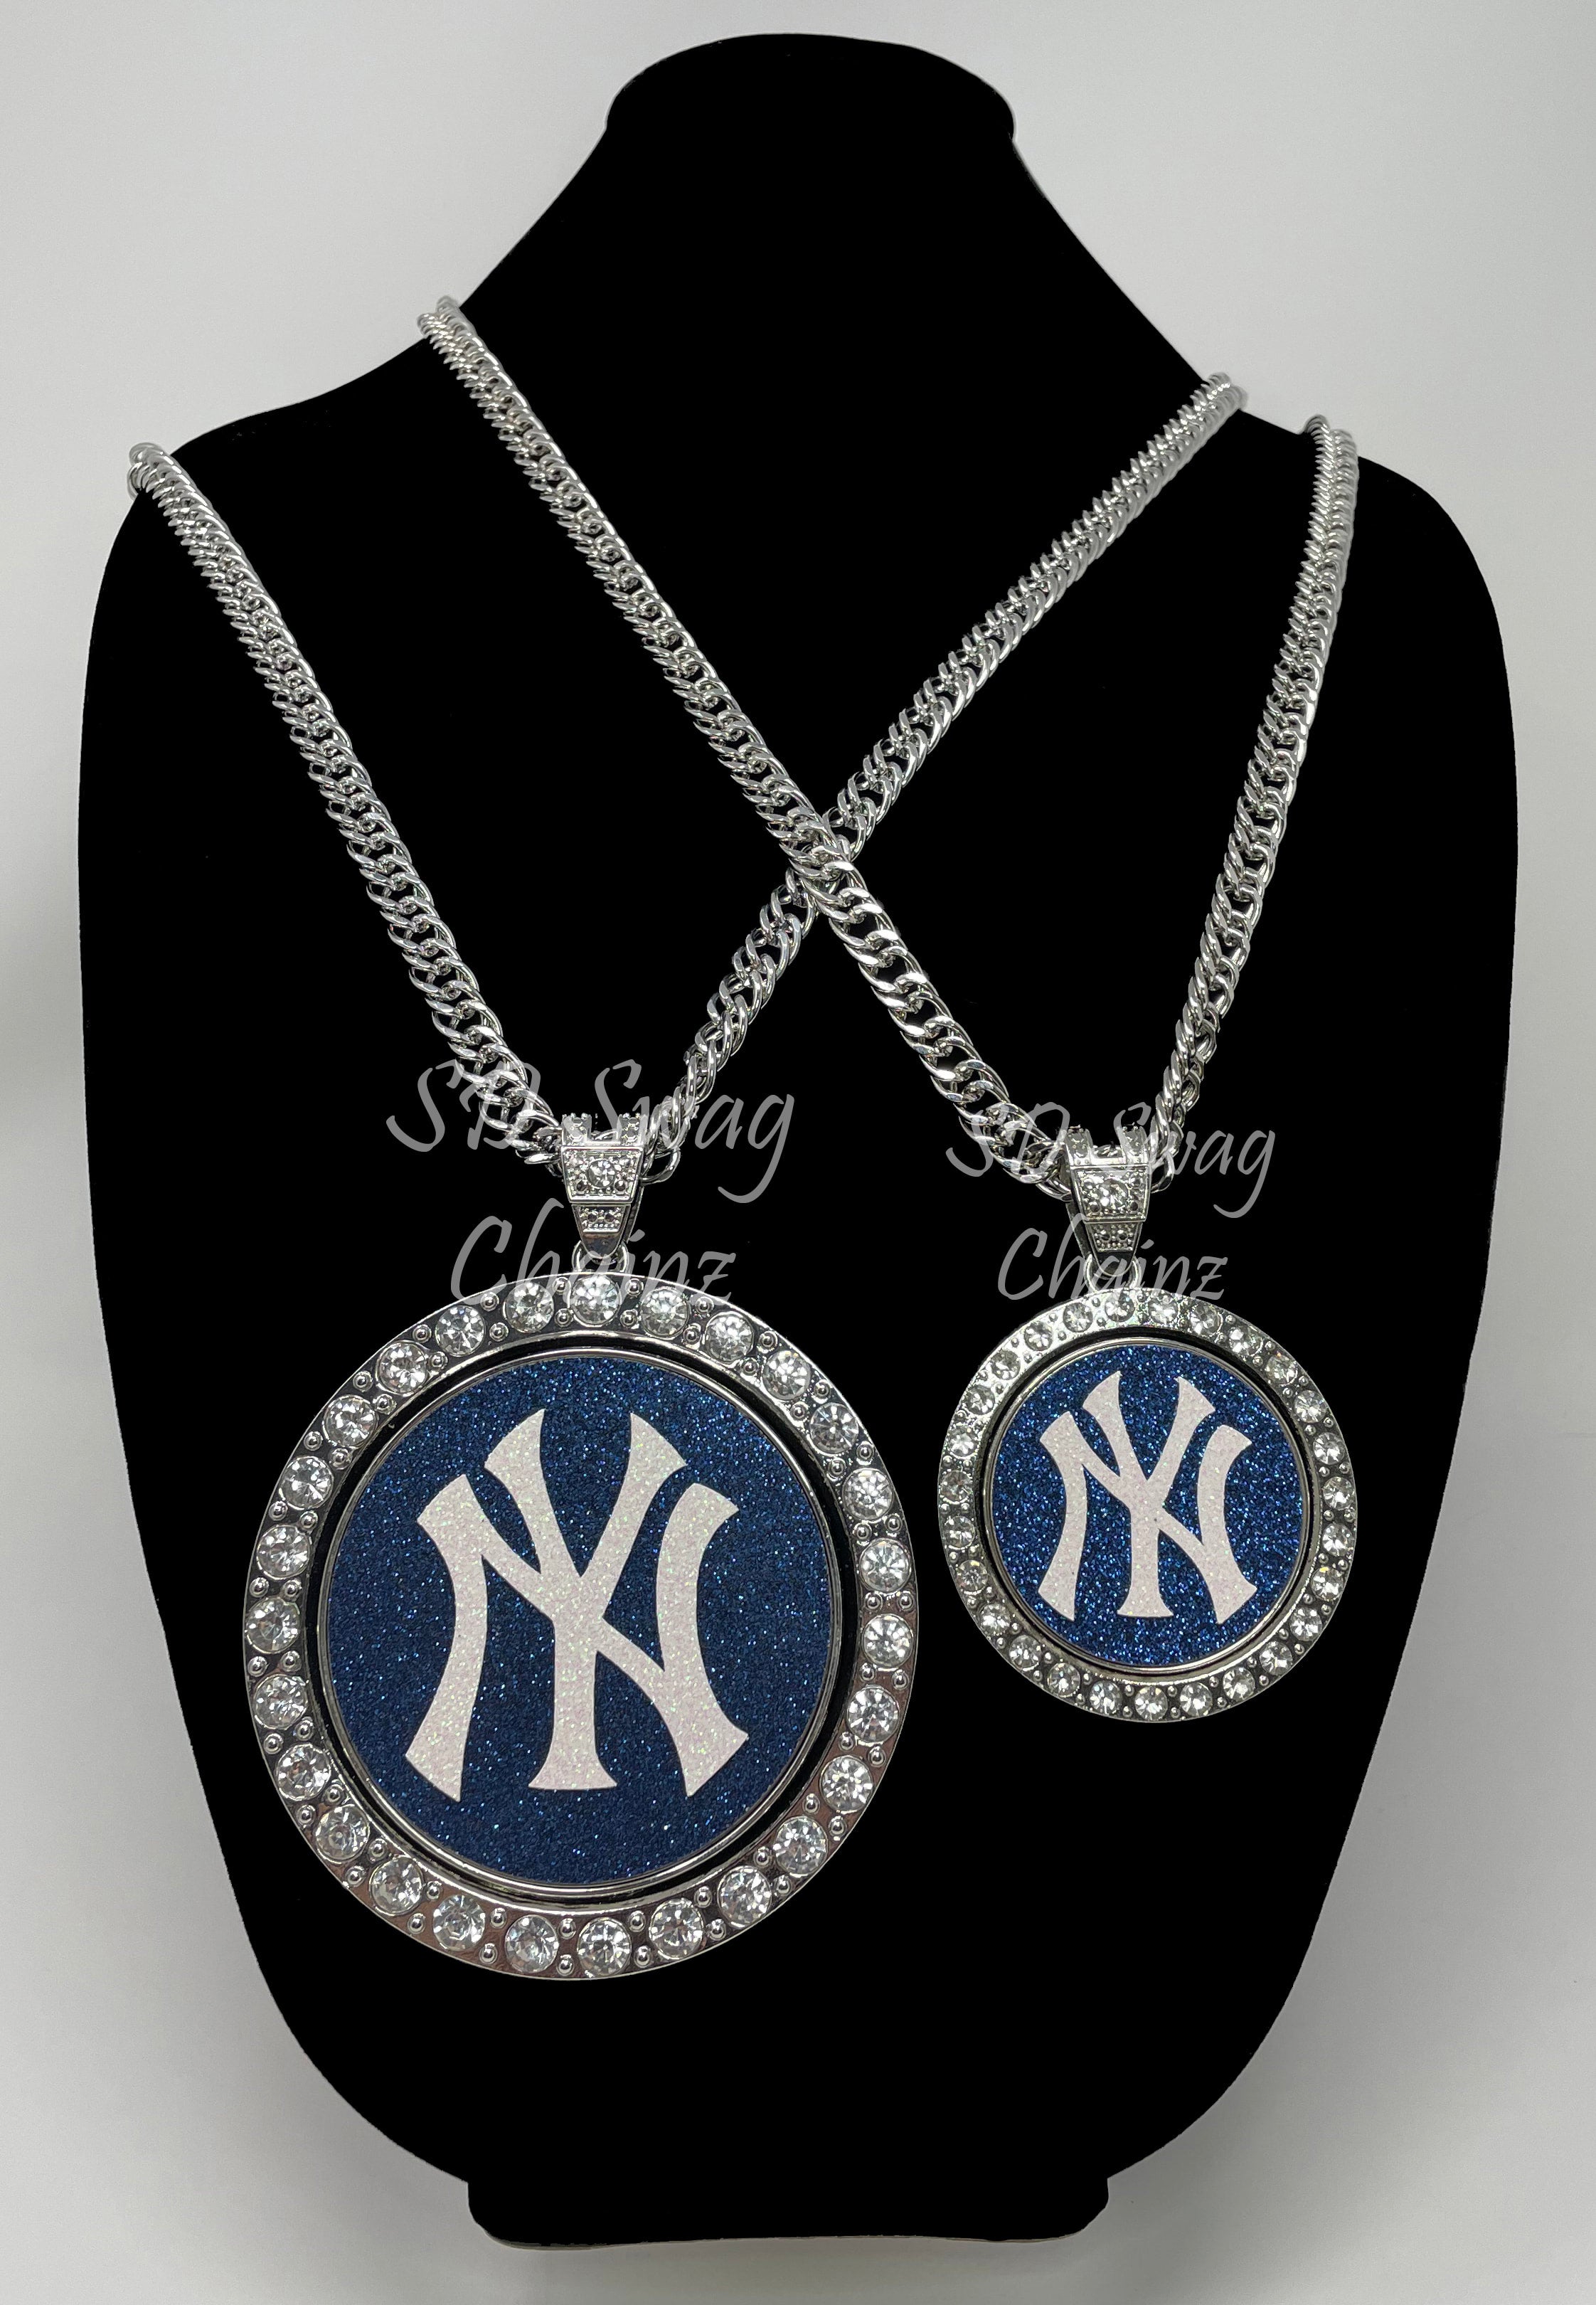 New York Yankees Swag Chain - Custom Silver Spinning Necklace (Blue)